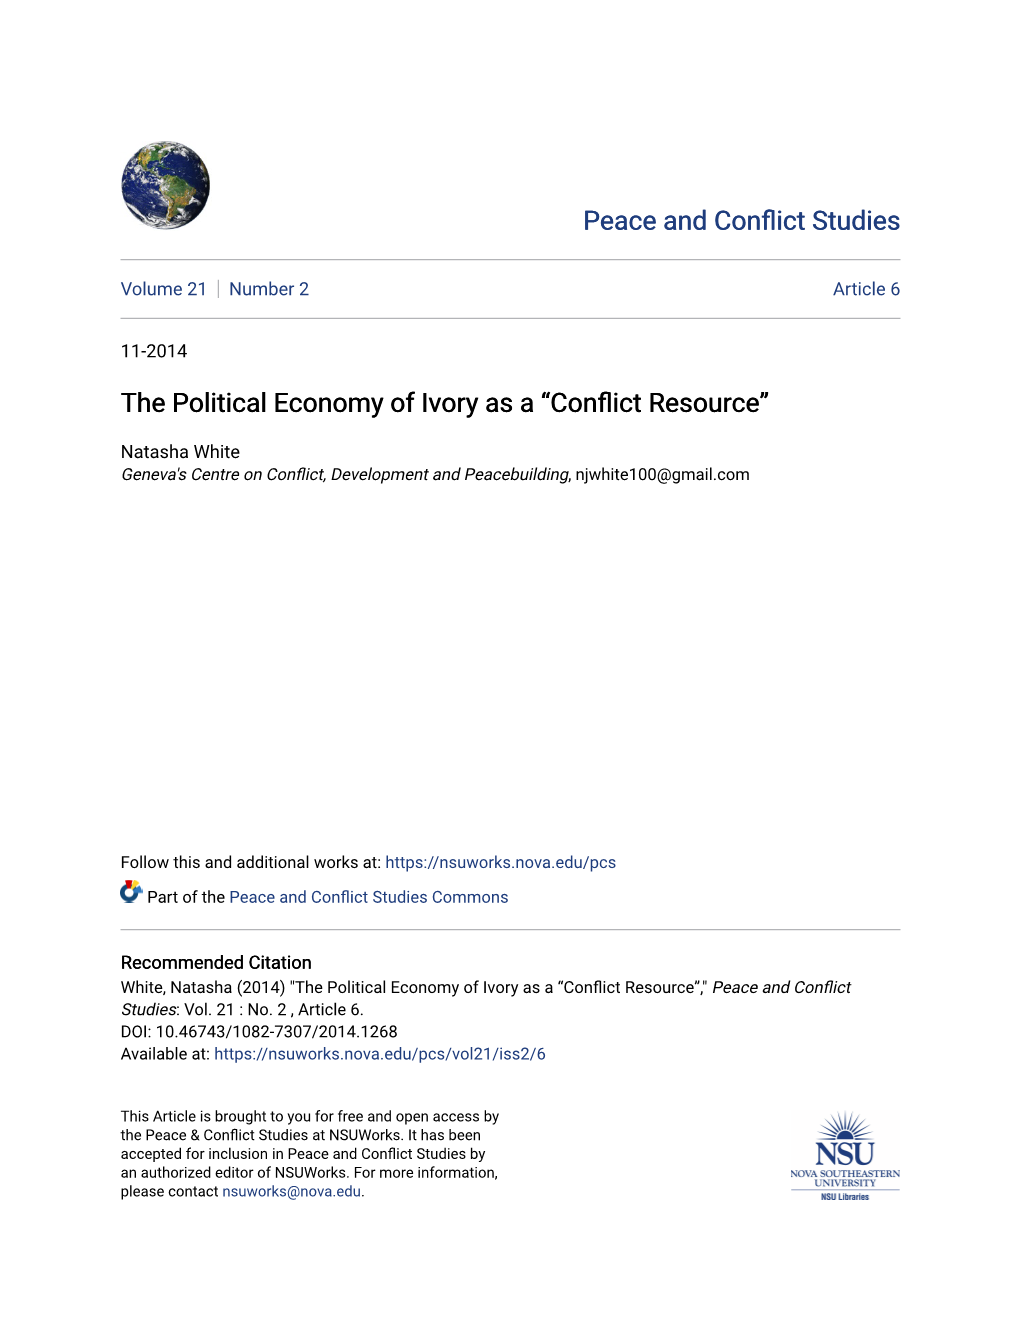 The Political Economy of Ivory As a “Conflict Resource”